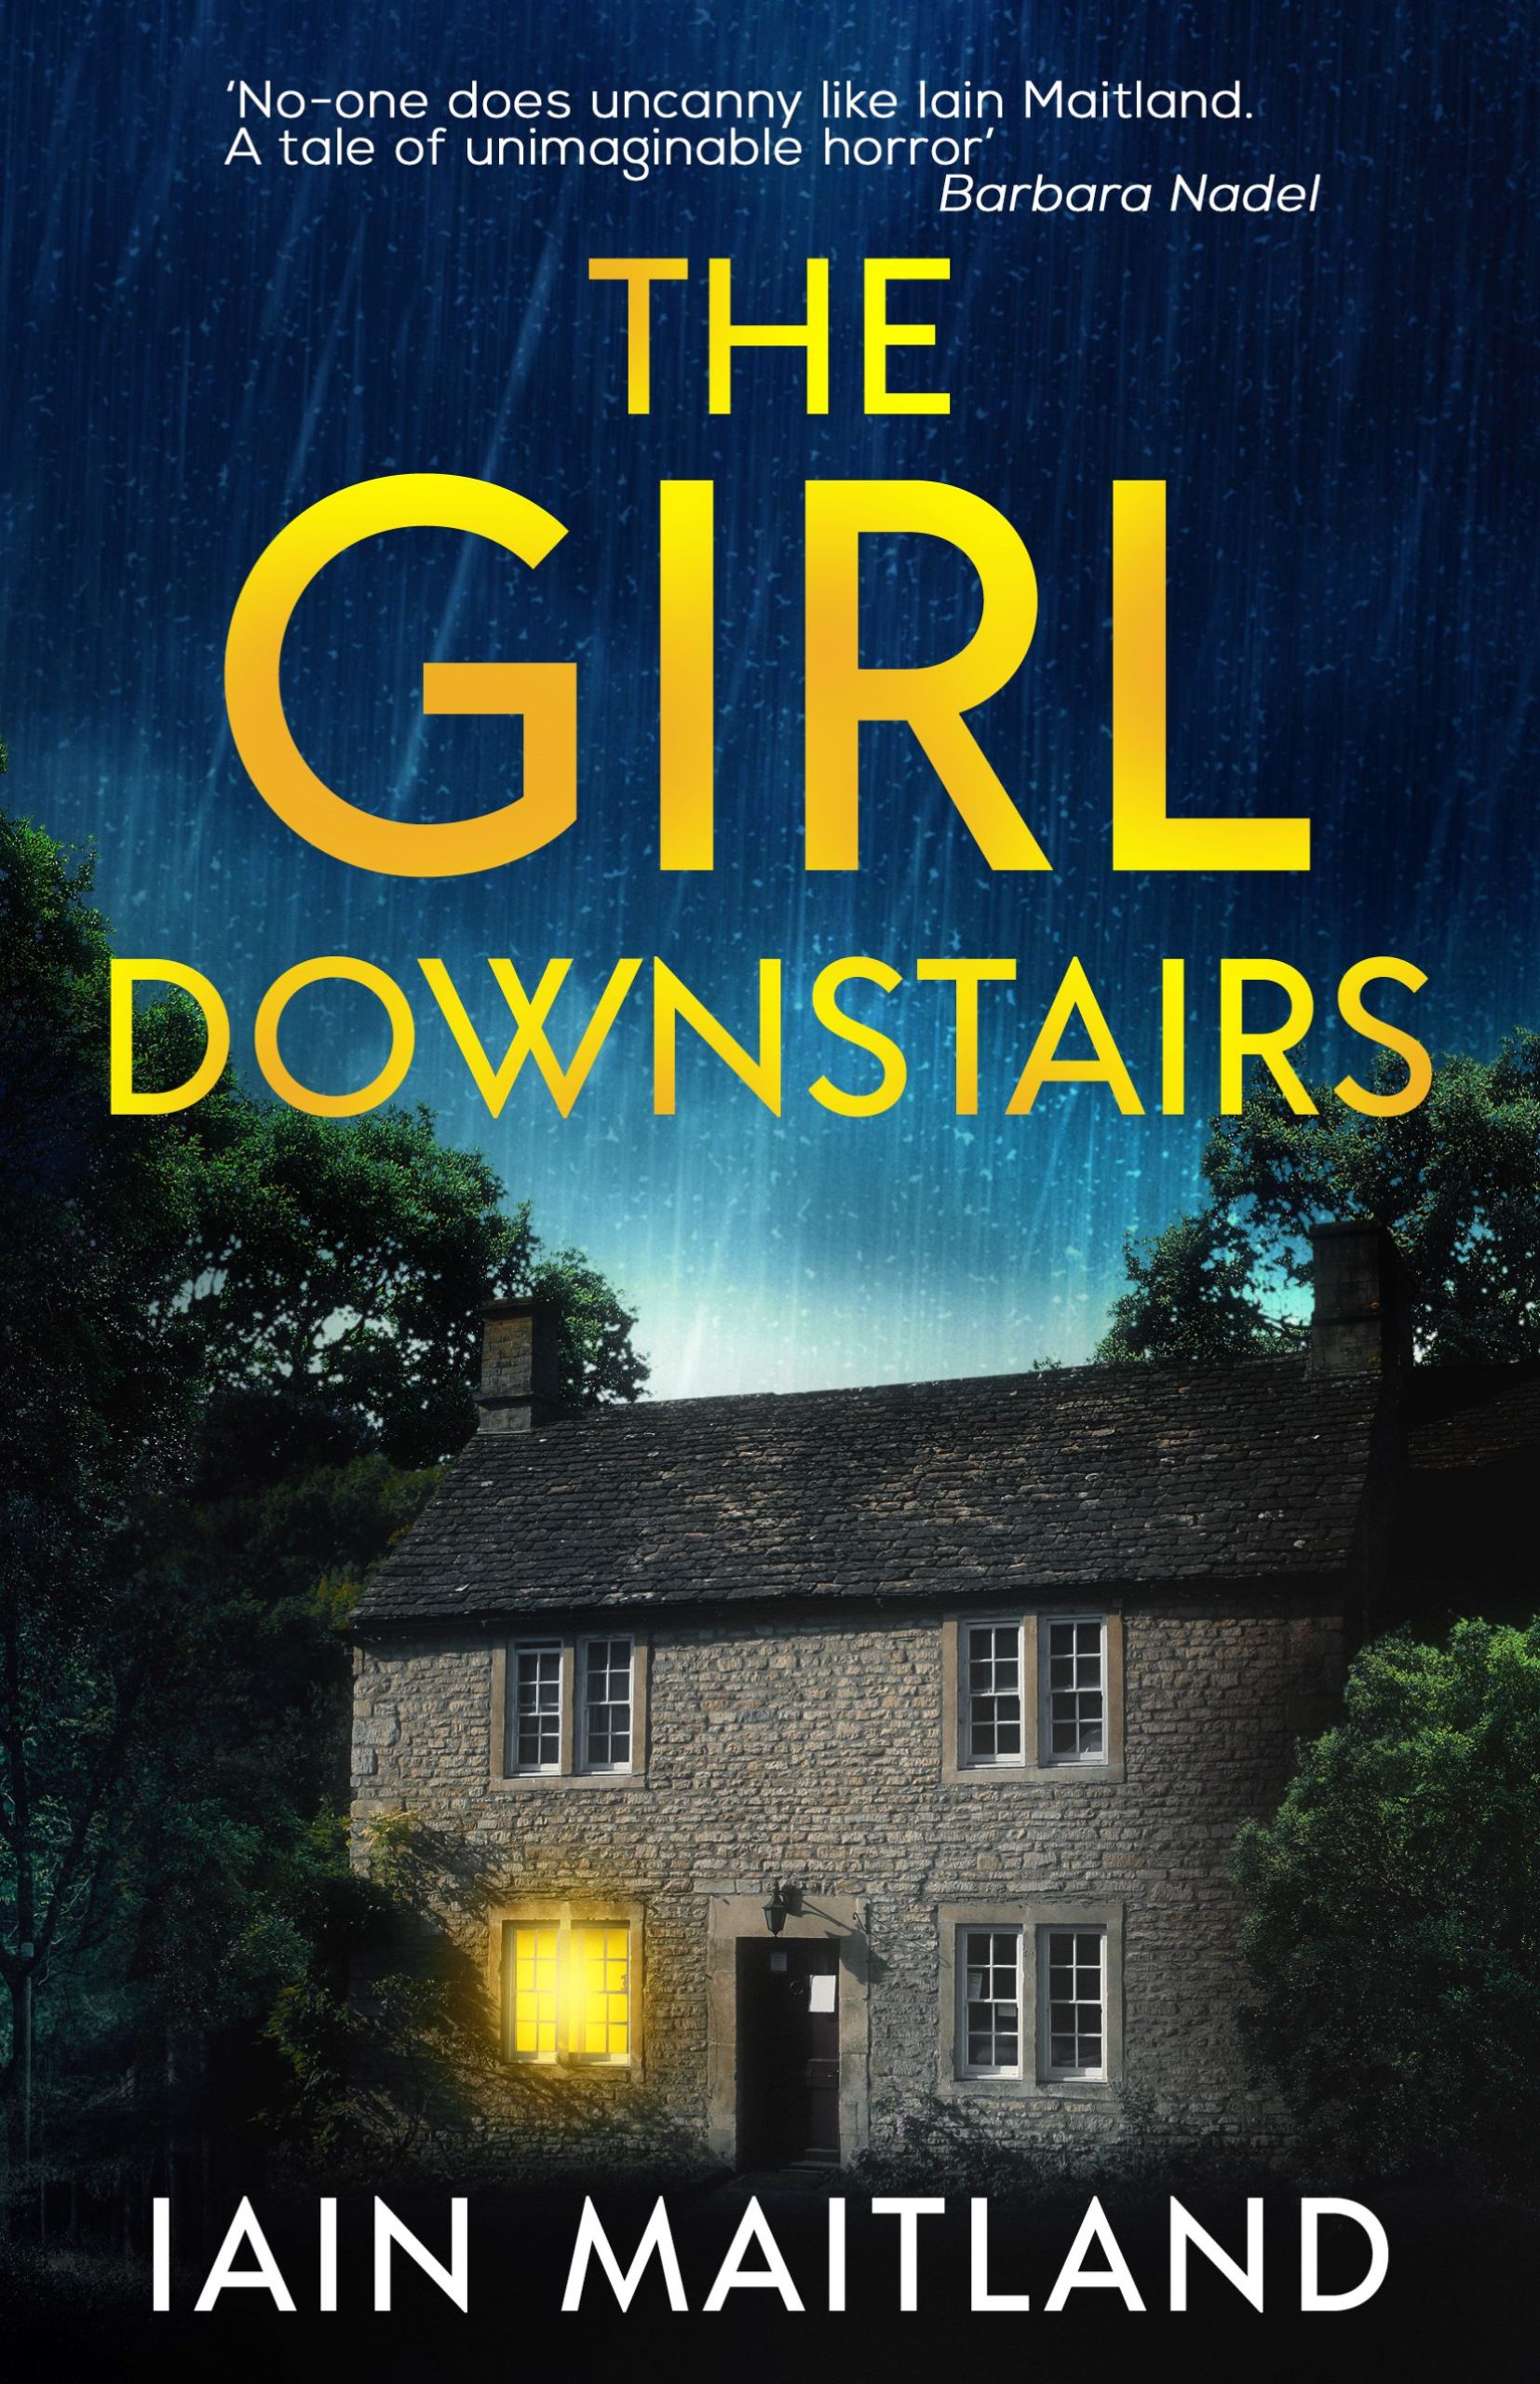 IAIN MAITLAND NEW RELEASE – THE GIRL DOWNSTAIRS